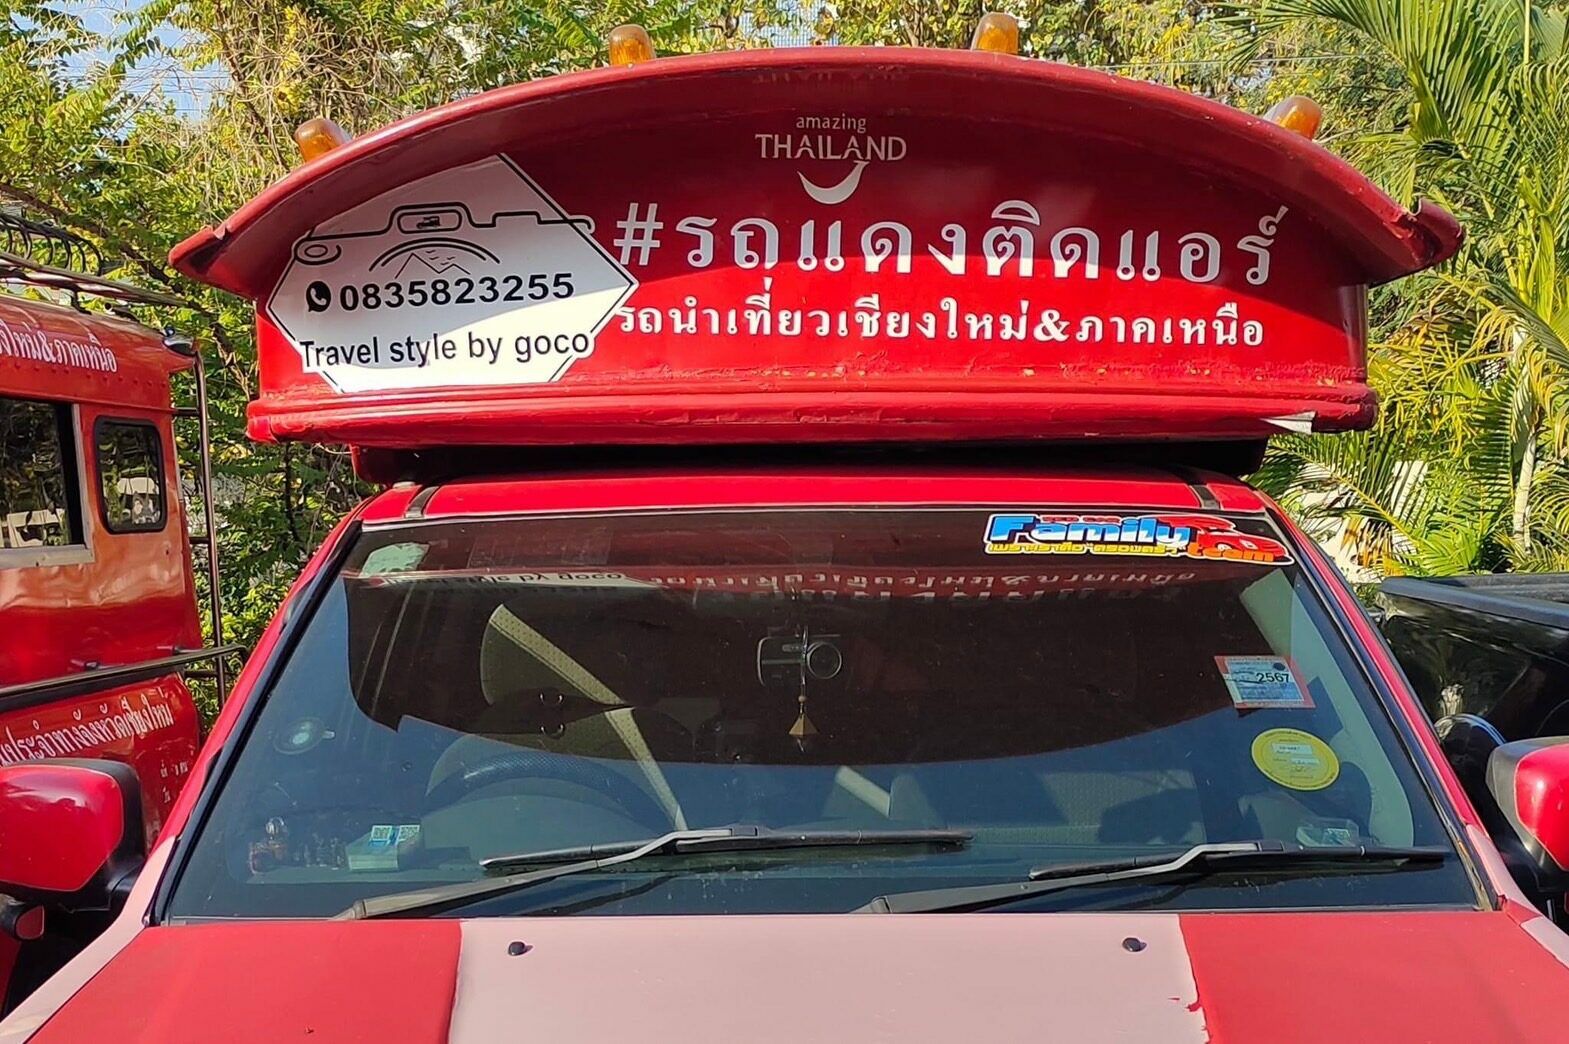 Chiang Mai songthaew goes cool with air-con and PM2.5 filters | News by Thaiger